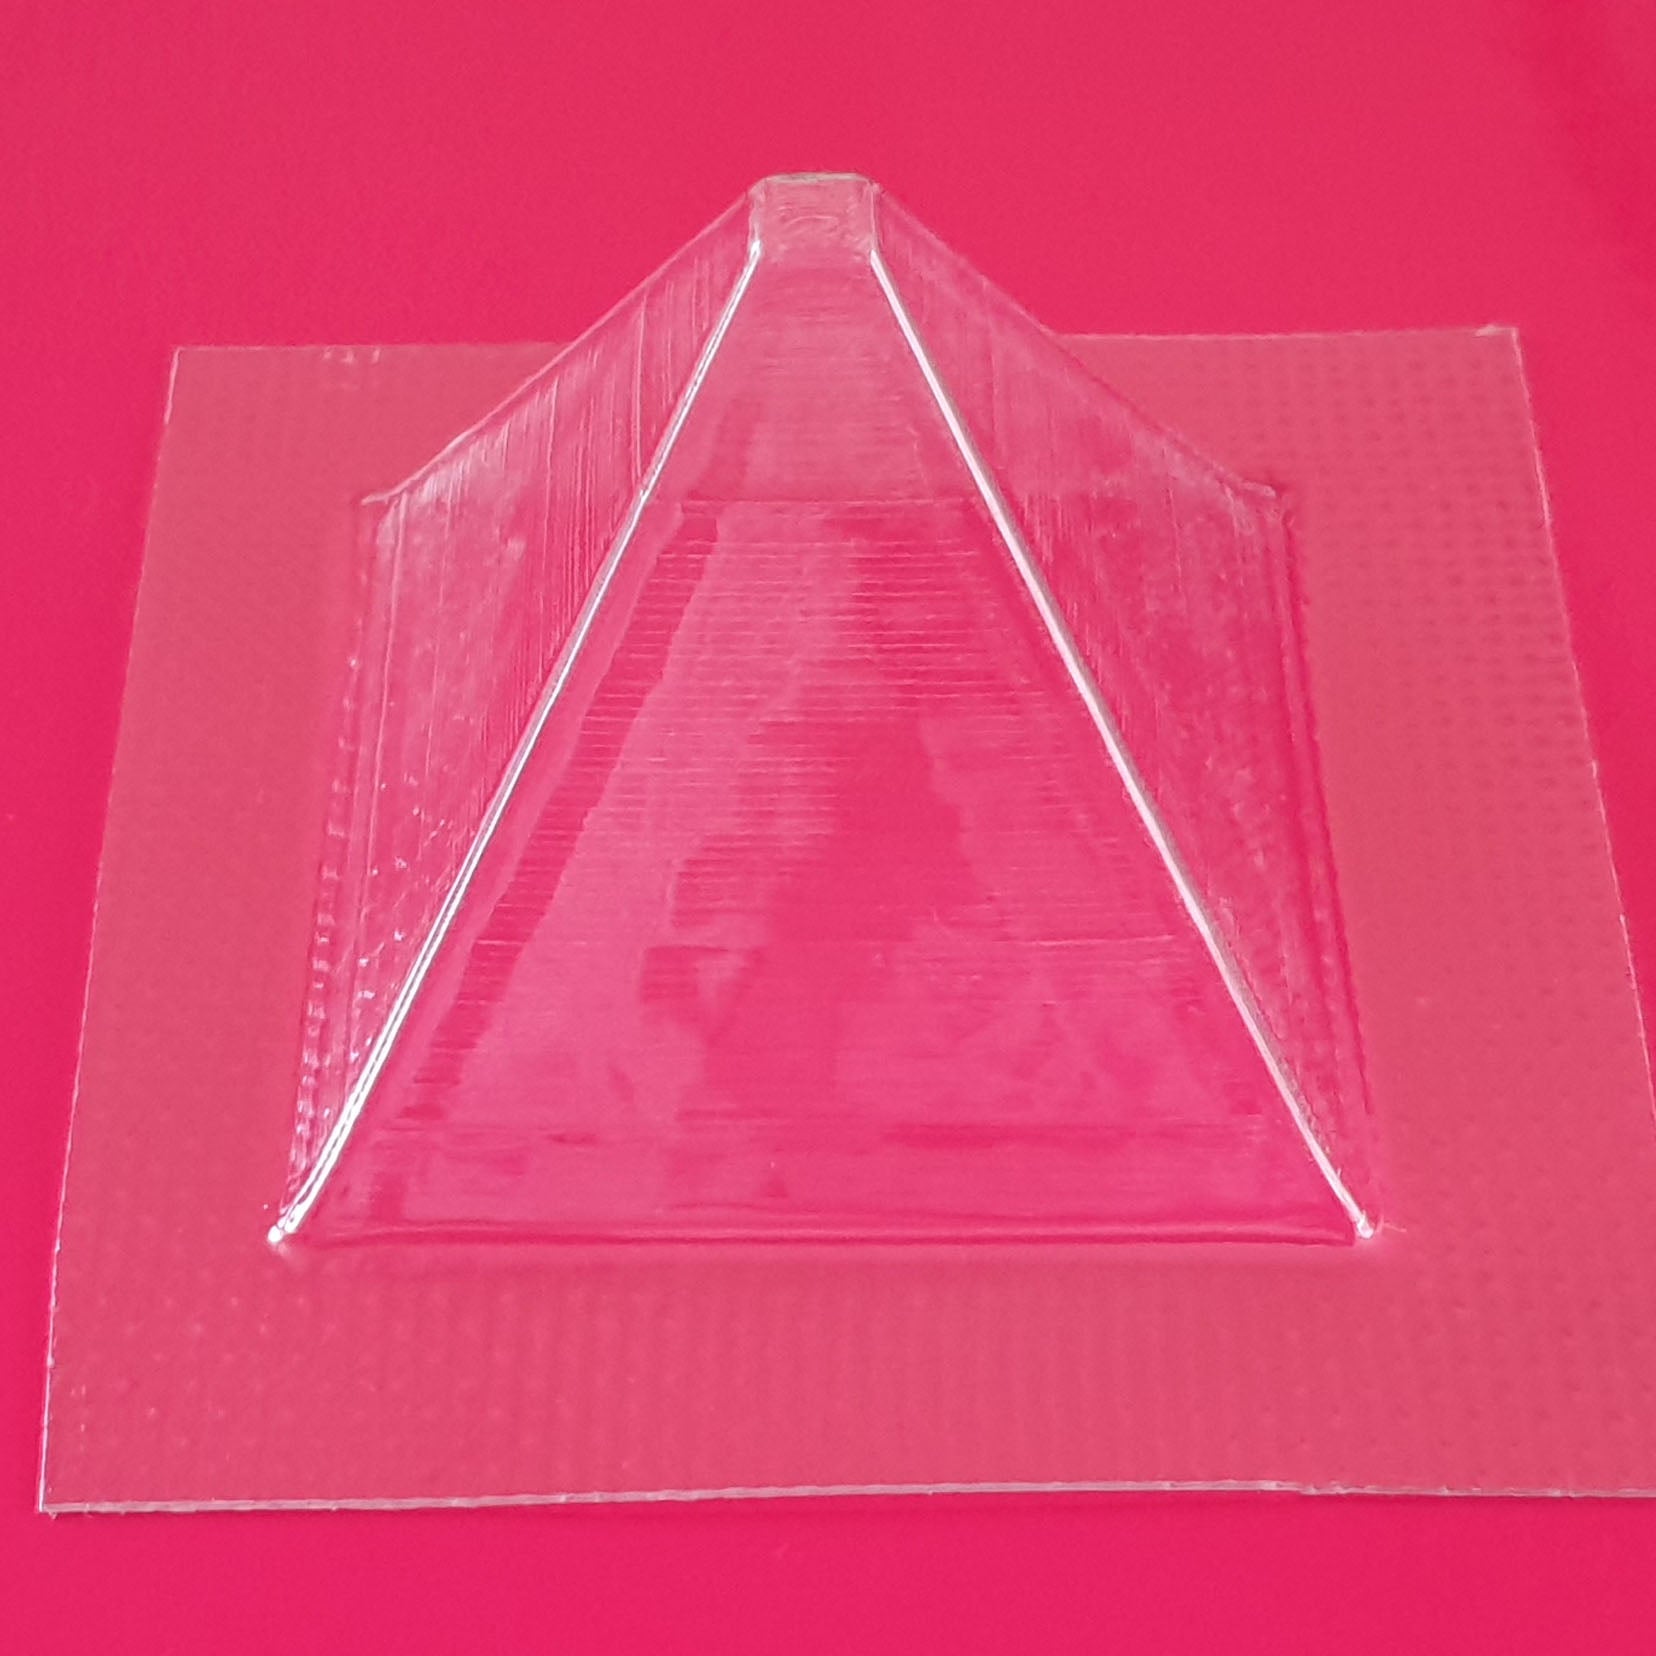 Pyramid Mould | Truly Personal | Bath Bomb, Soap, Resin, Chocolate, Jelly, Wax Melts Mold